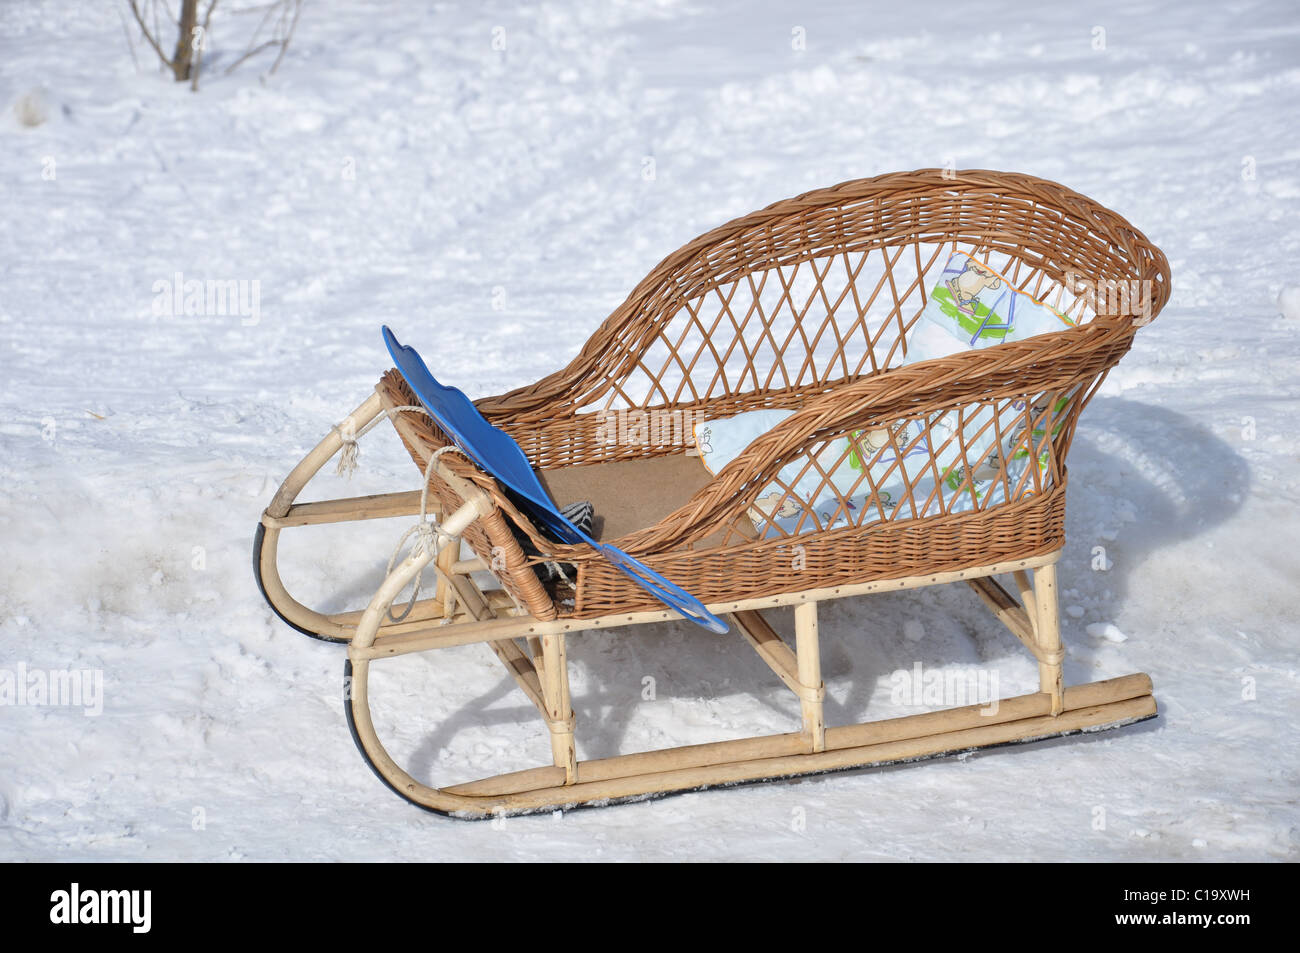 Children's wicker sled stand in the snow Stock Photo